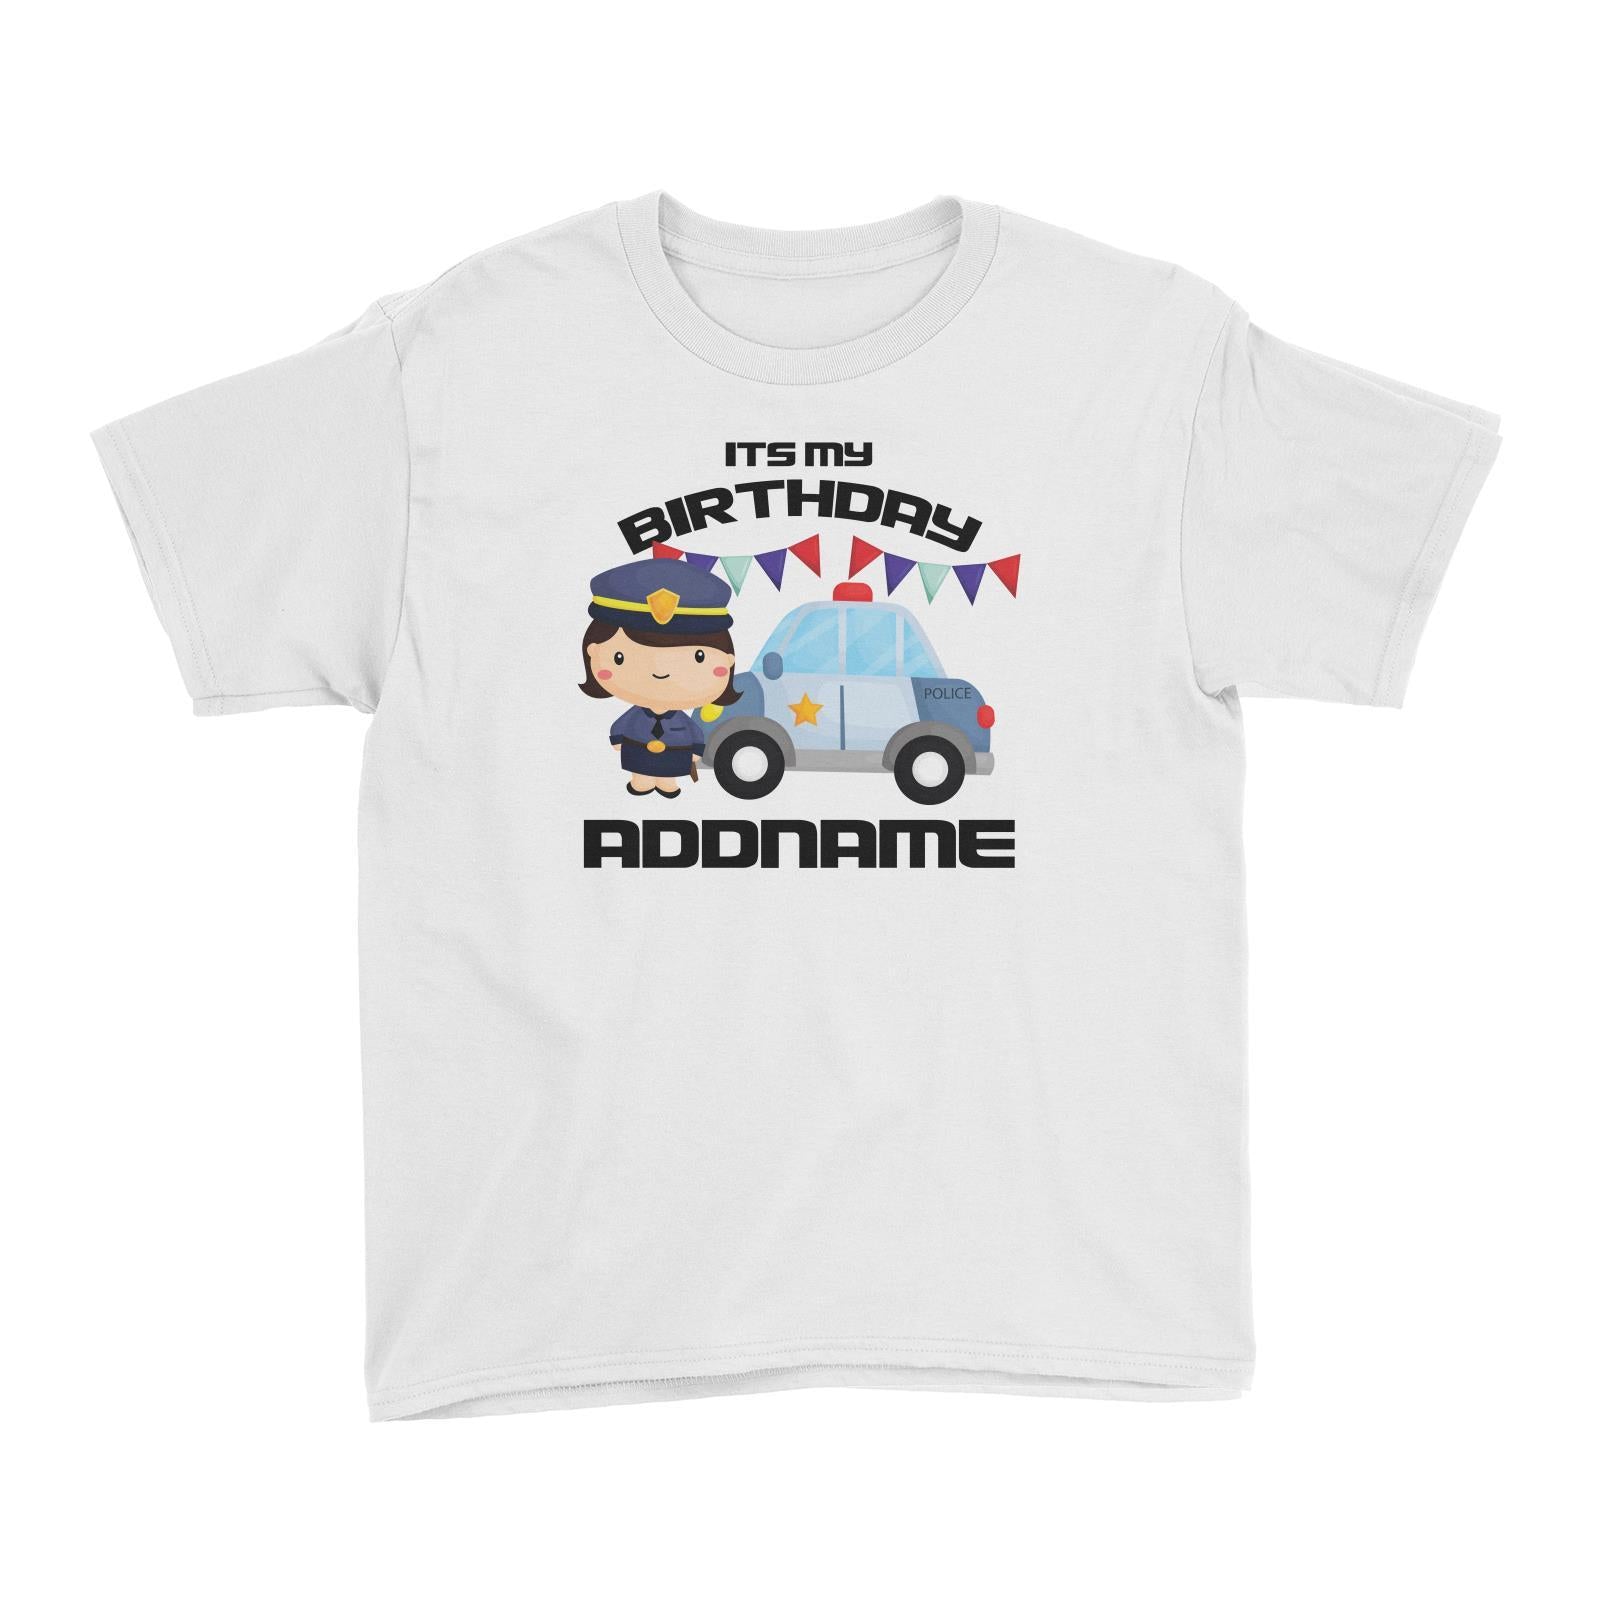 Birthday Police Officer Girl In Suit With Police Car Its My Birthday Addname Kid's T-Shirt